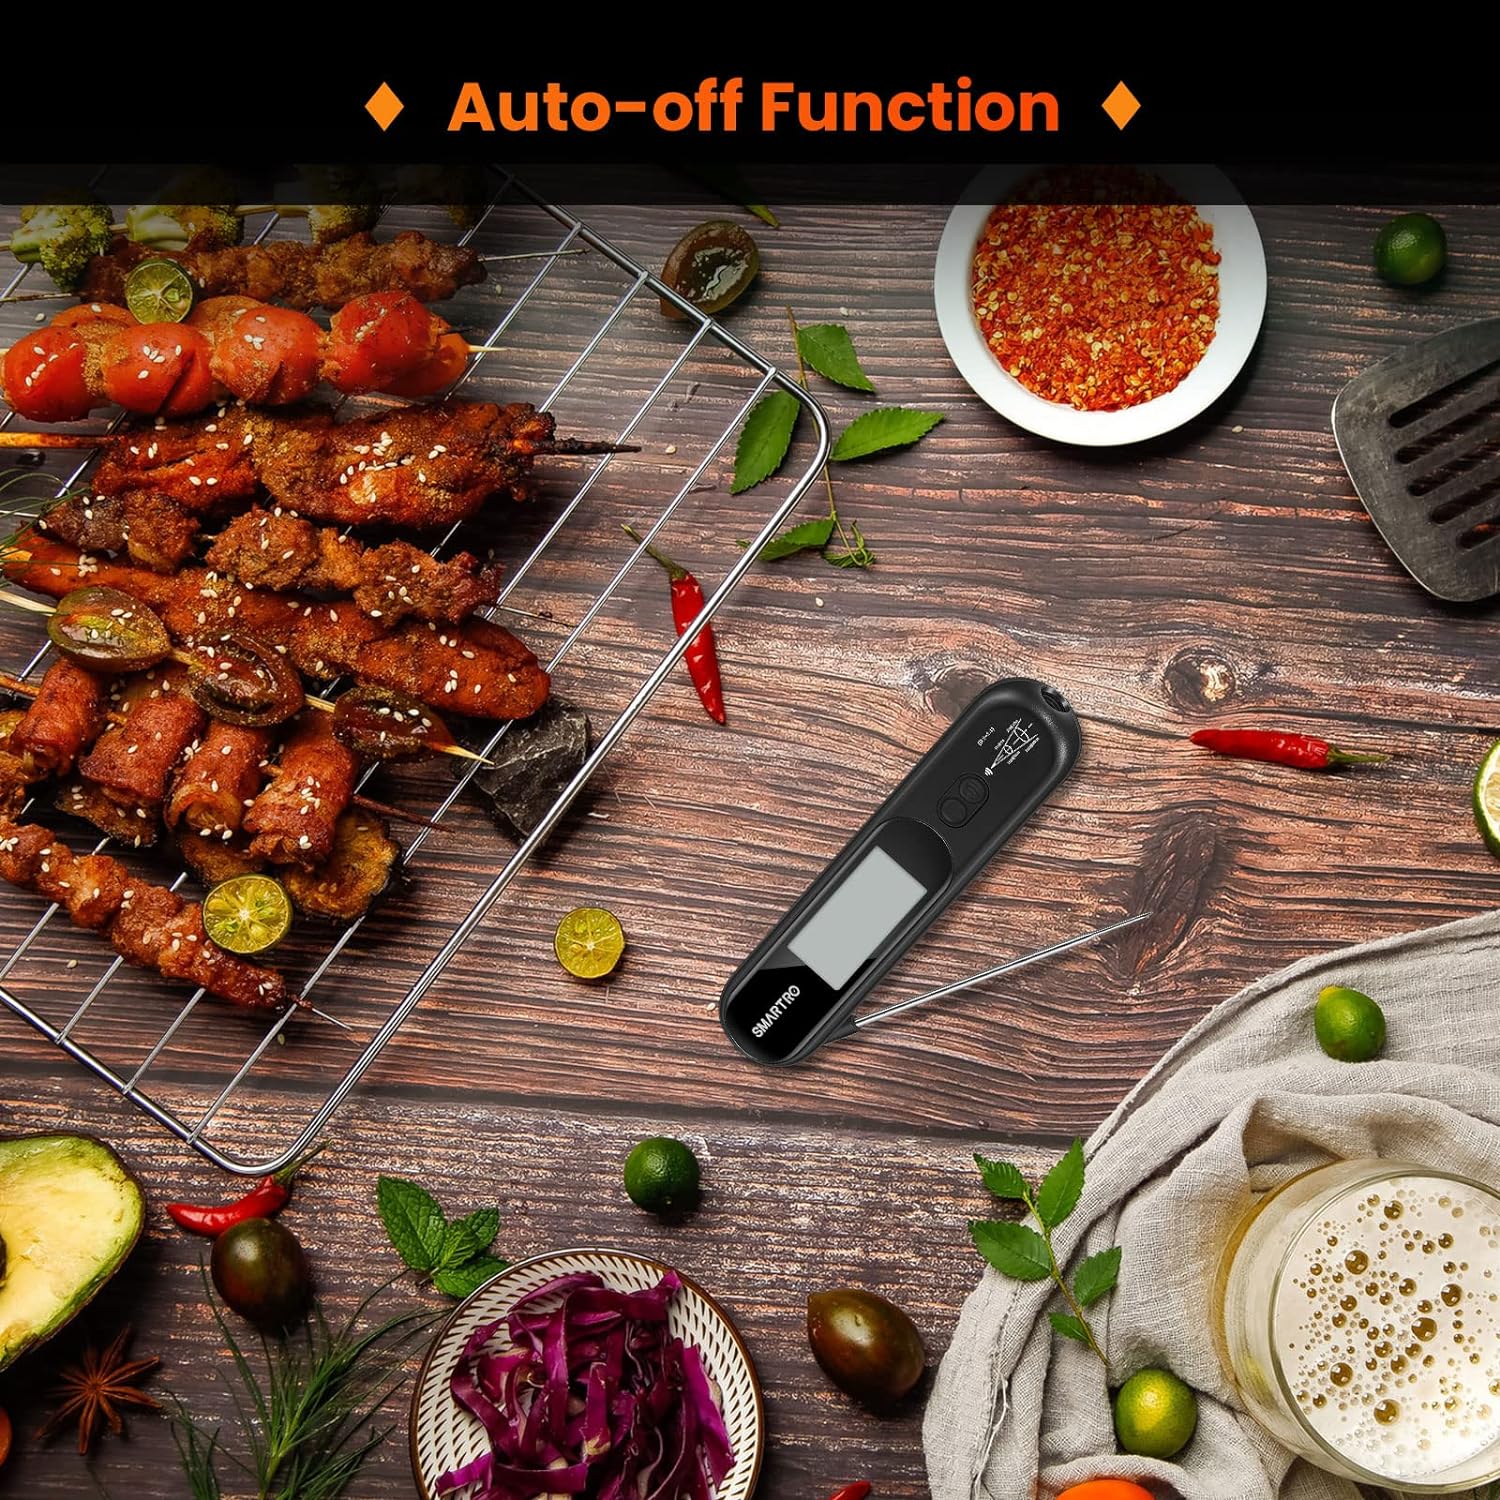 SMARTRO ST49 IR 2-in-1 Instant Meat Thermometer Infrared Thermometer for Cooking Food Grilling BBQ Kitchen Candy